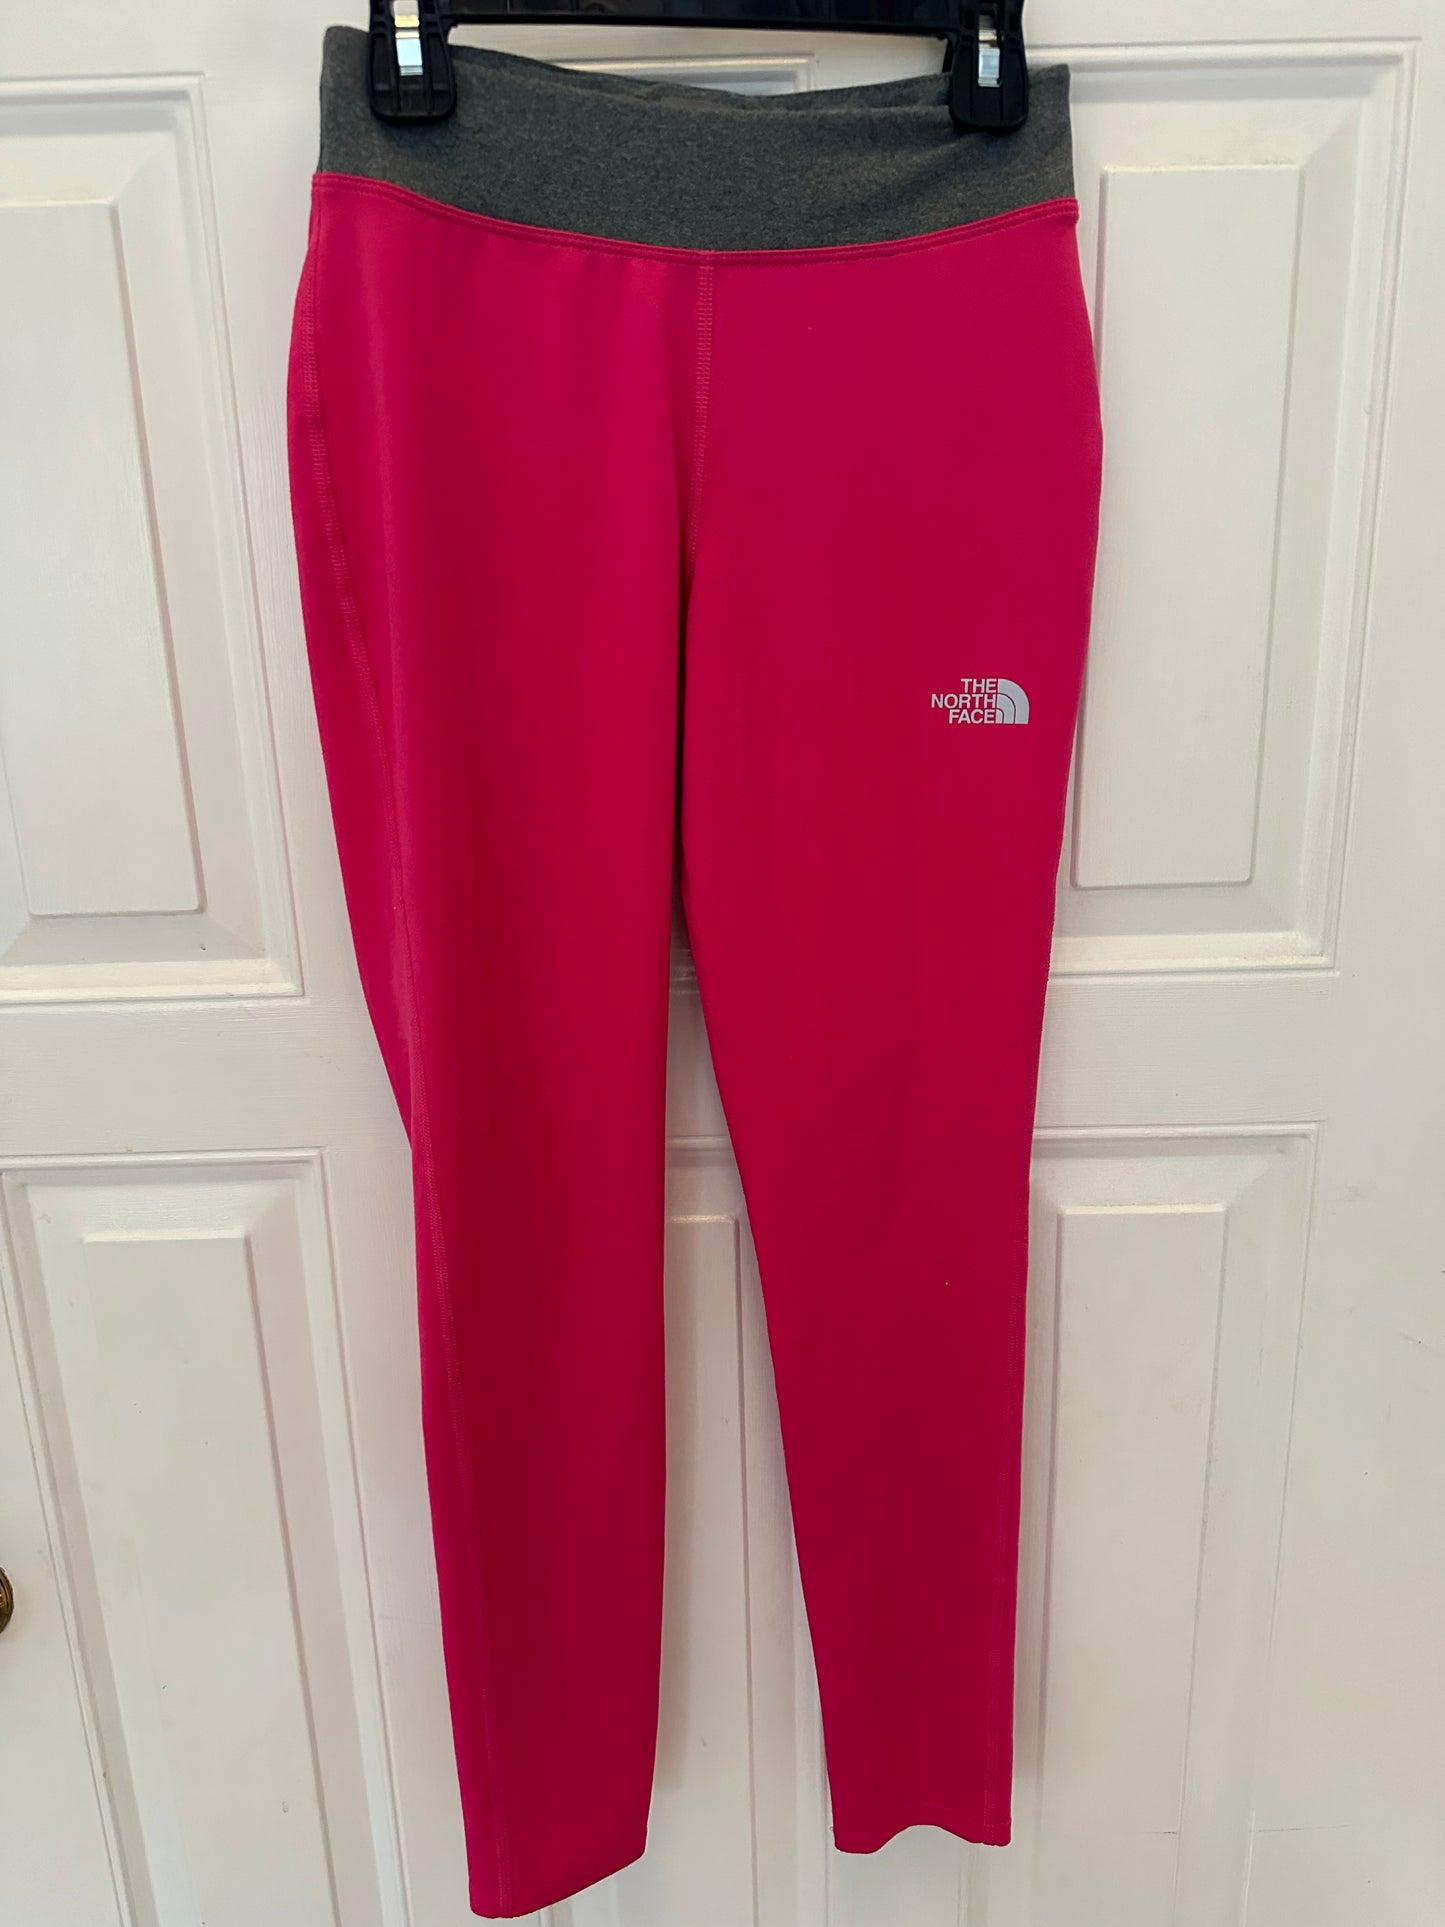 North Face Burgundy Wine Sz Small Womens Red Hiking Pants